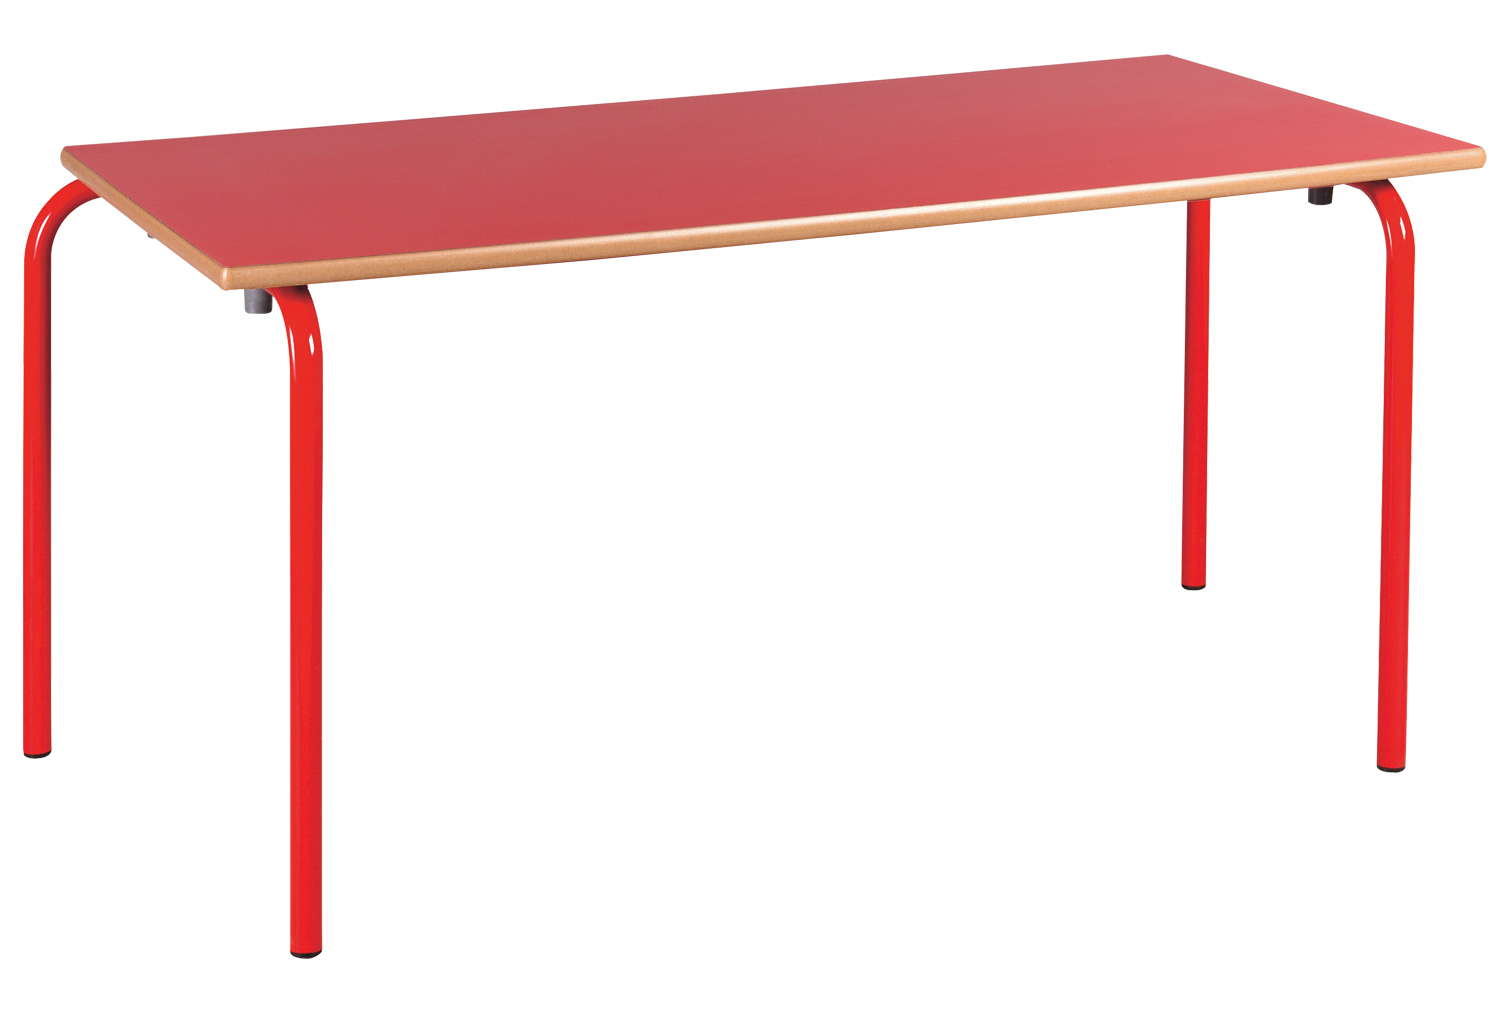 Qty 3 - Budget Rectangular Nursery Classroom Tables, 46h (cm) - 3-4 Years, Red